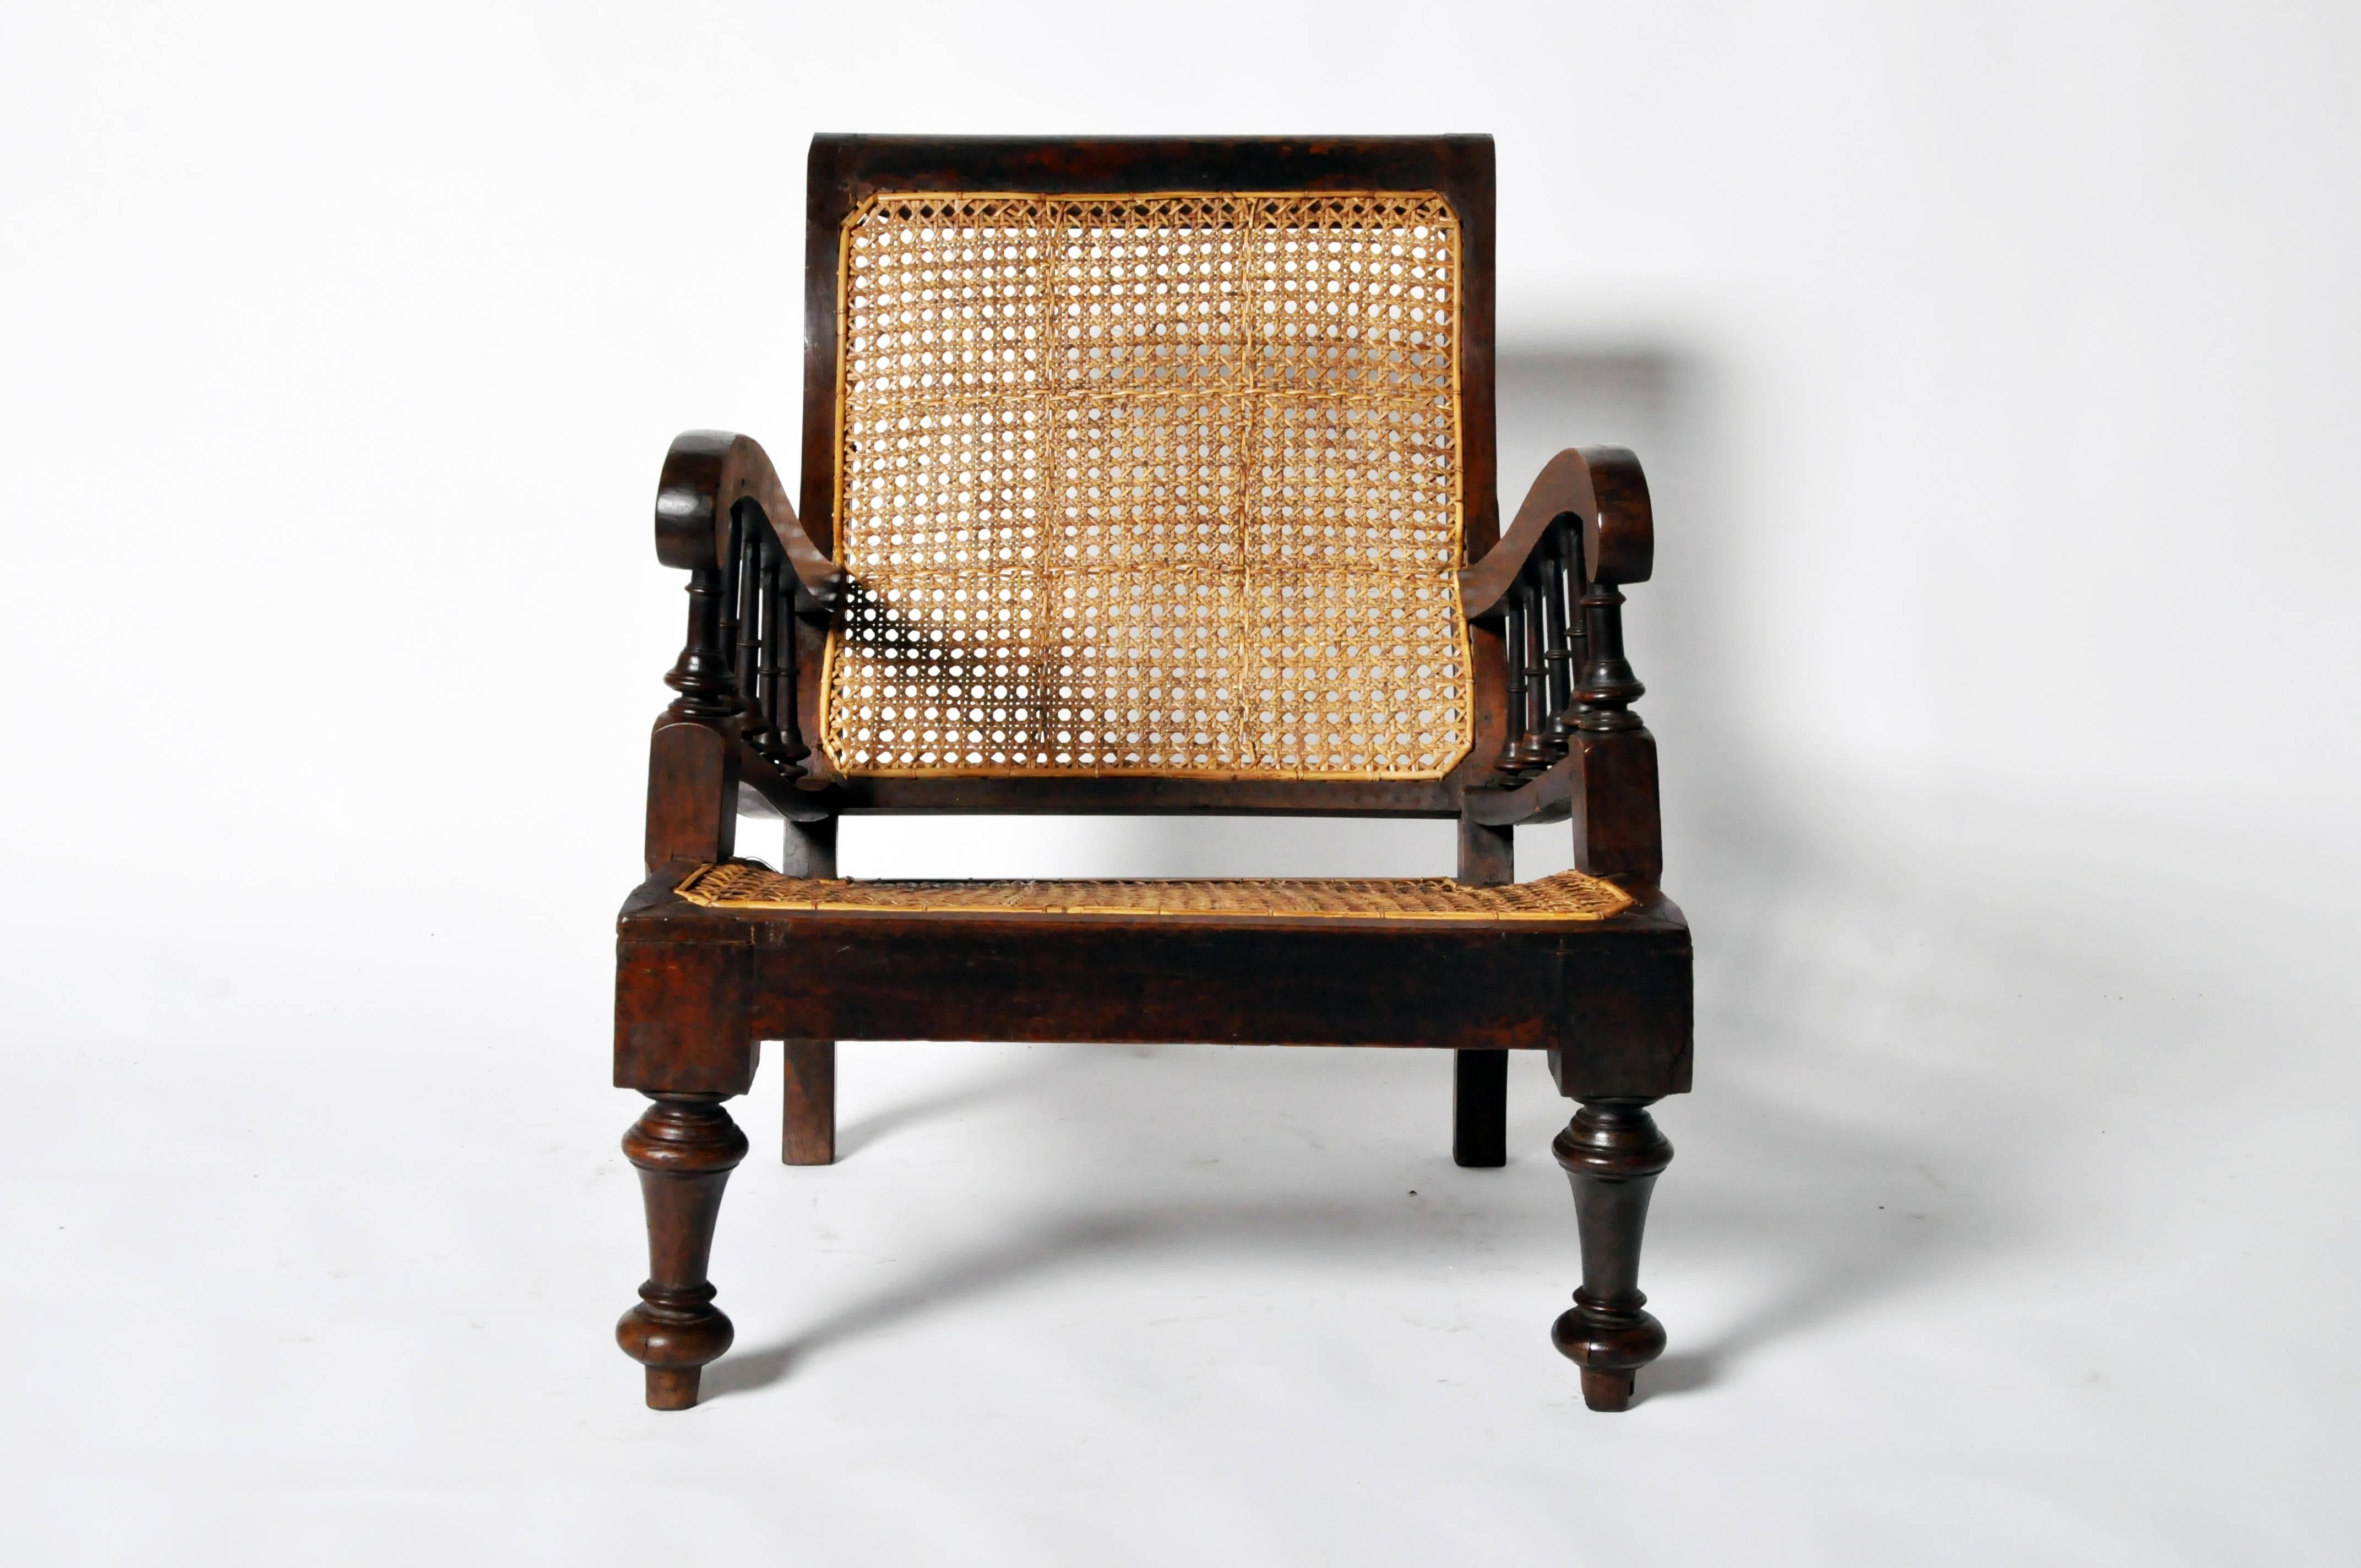 Constructed with lounge-like comfort in mind, the slightly reclined back and sloped seat feature handsome hole-to-hole traditional strand caning throughout. This relaxed armchair also has shapely arms supported by turned spindles, which mimic the